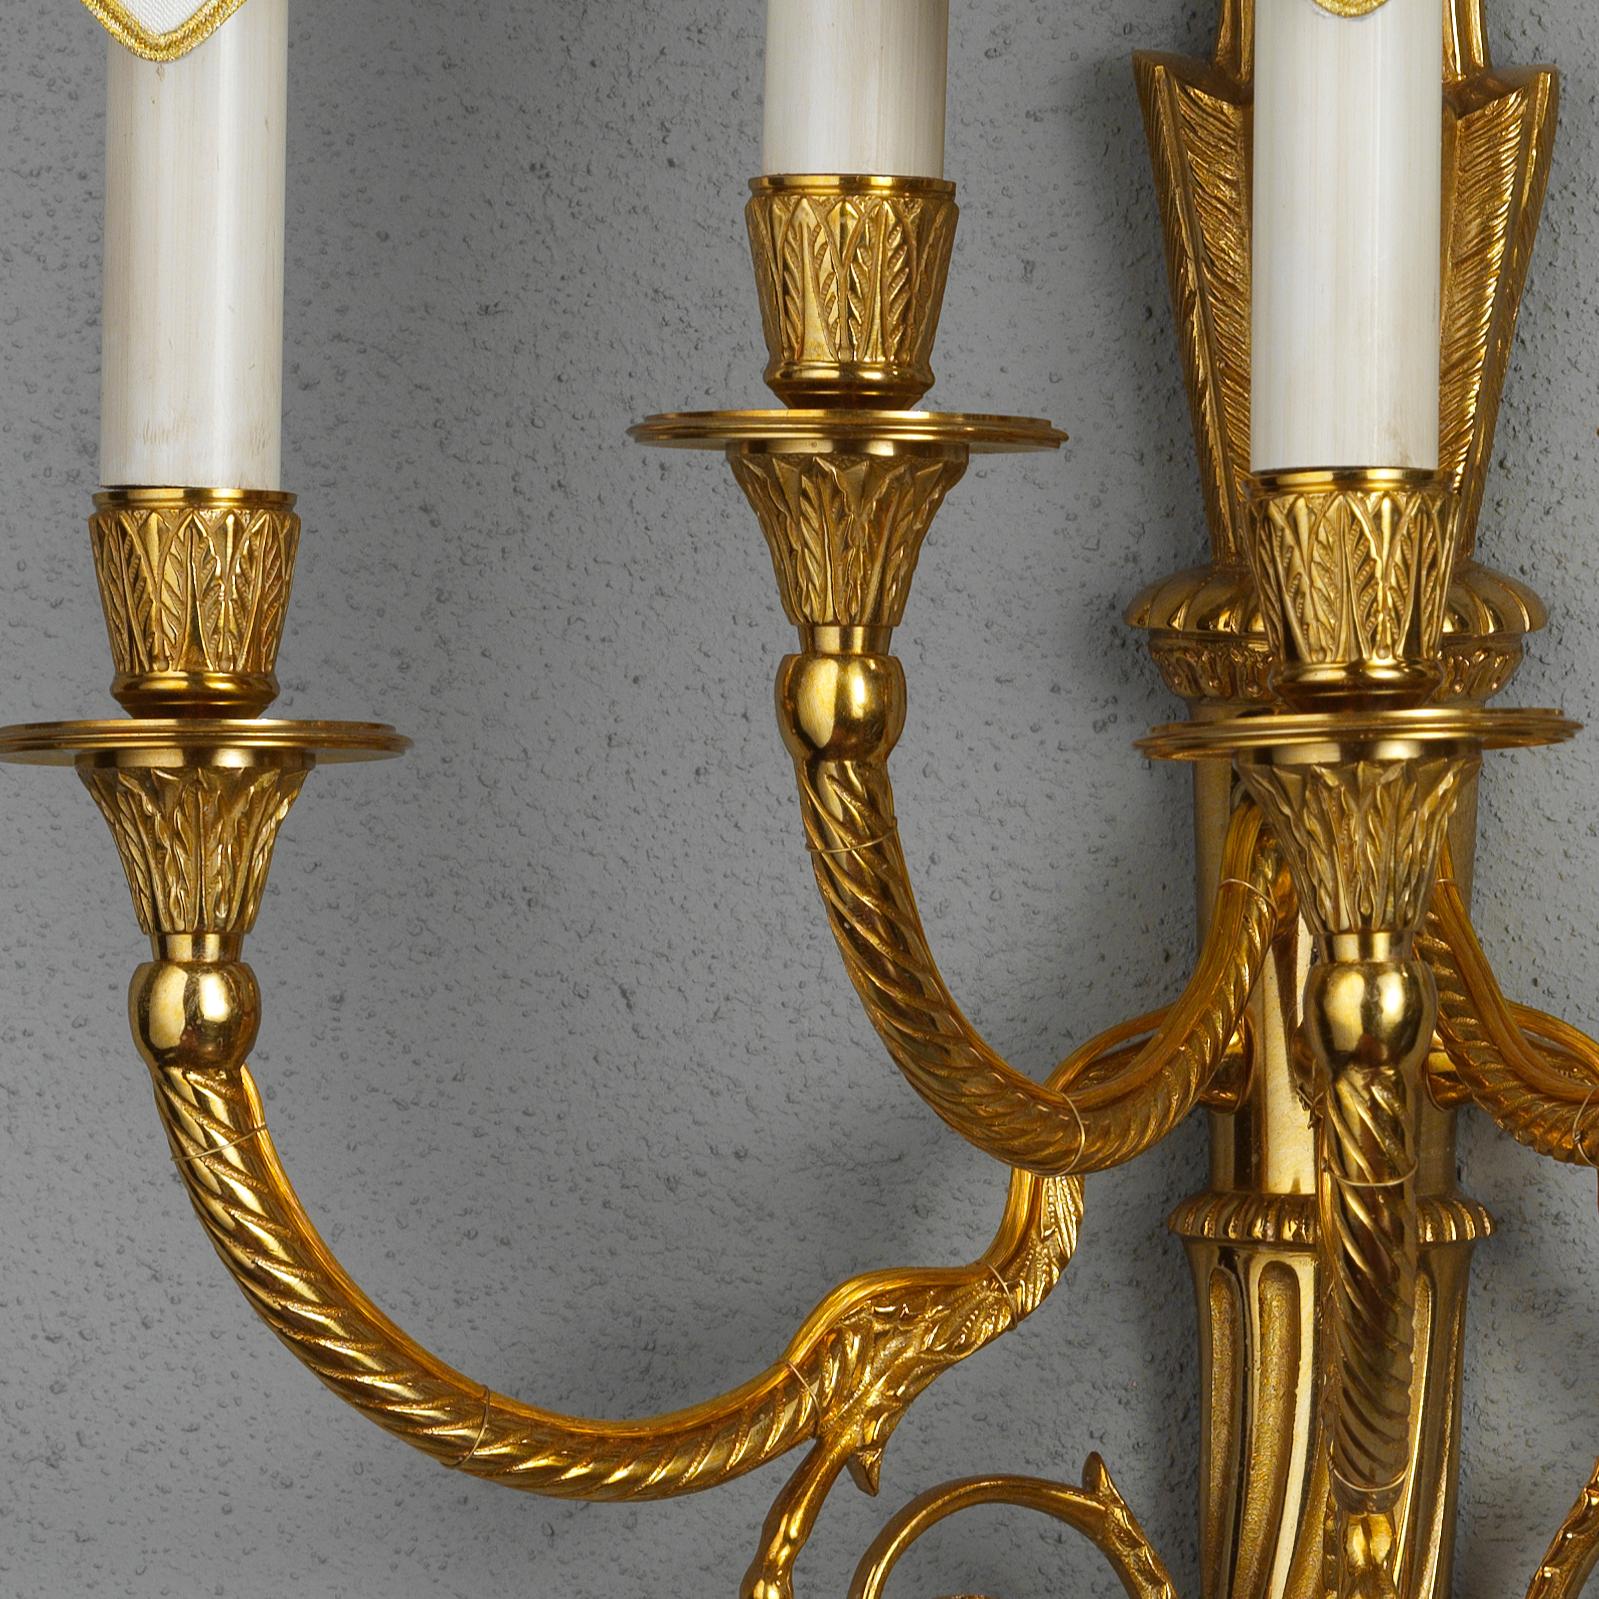 This elegant five-light Louis XVI style wall sconce by Gherardo Degli Albizzishows many high-quality hand chiselled details. At the top, there is a tassel, a typical element of Louis XVI period, and below there is quiver with arrows.
In the middle